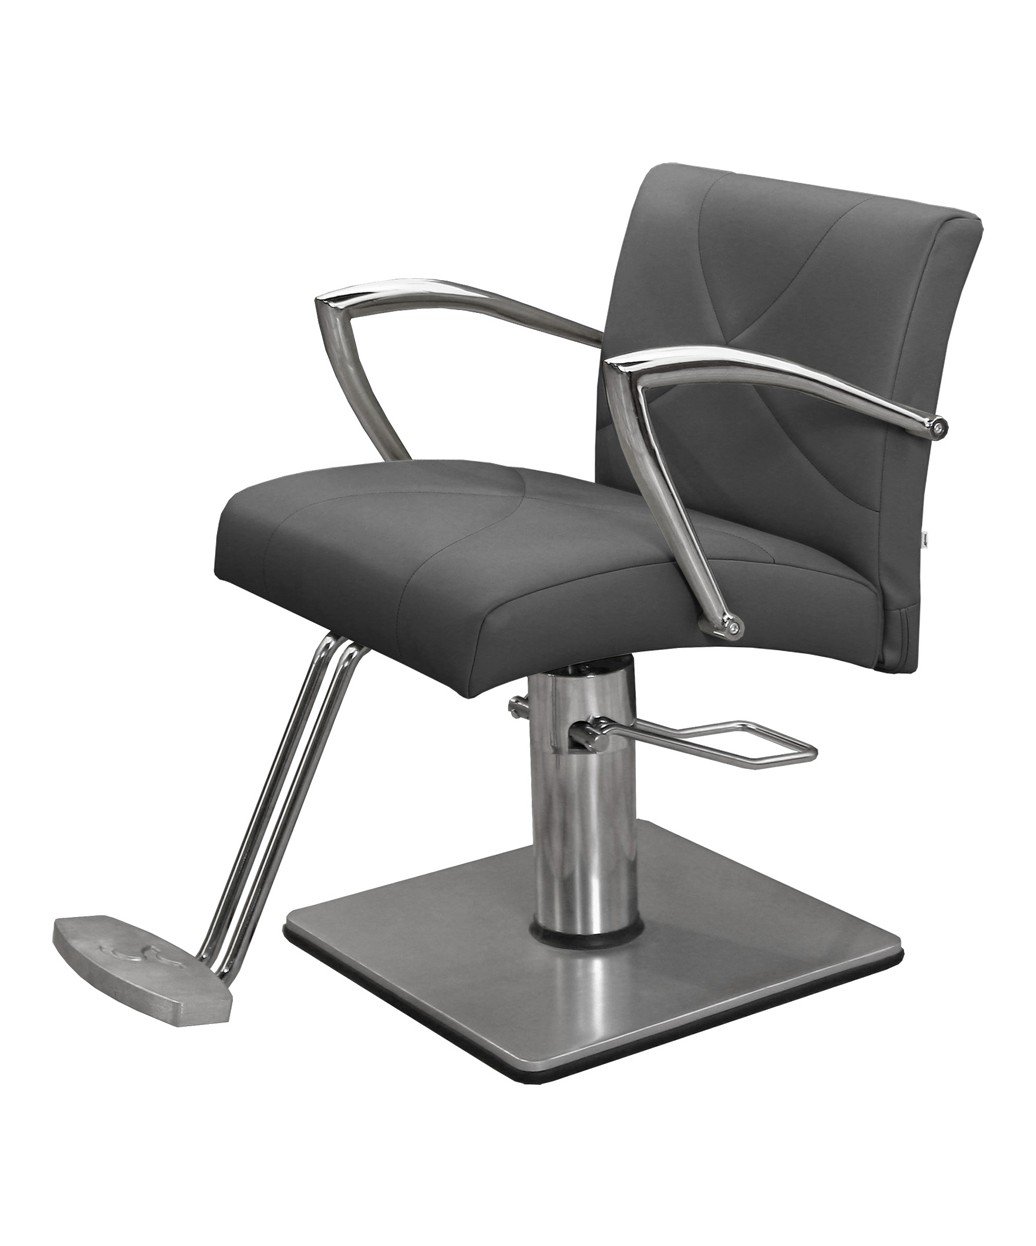 Collins 4900 Callie Styling Chair